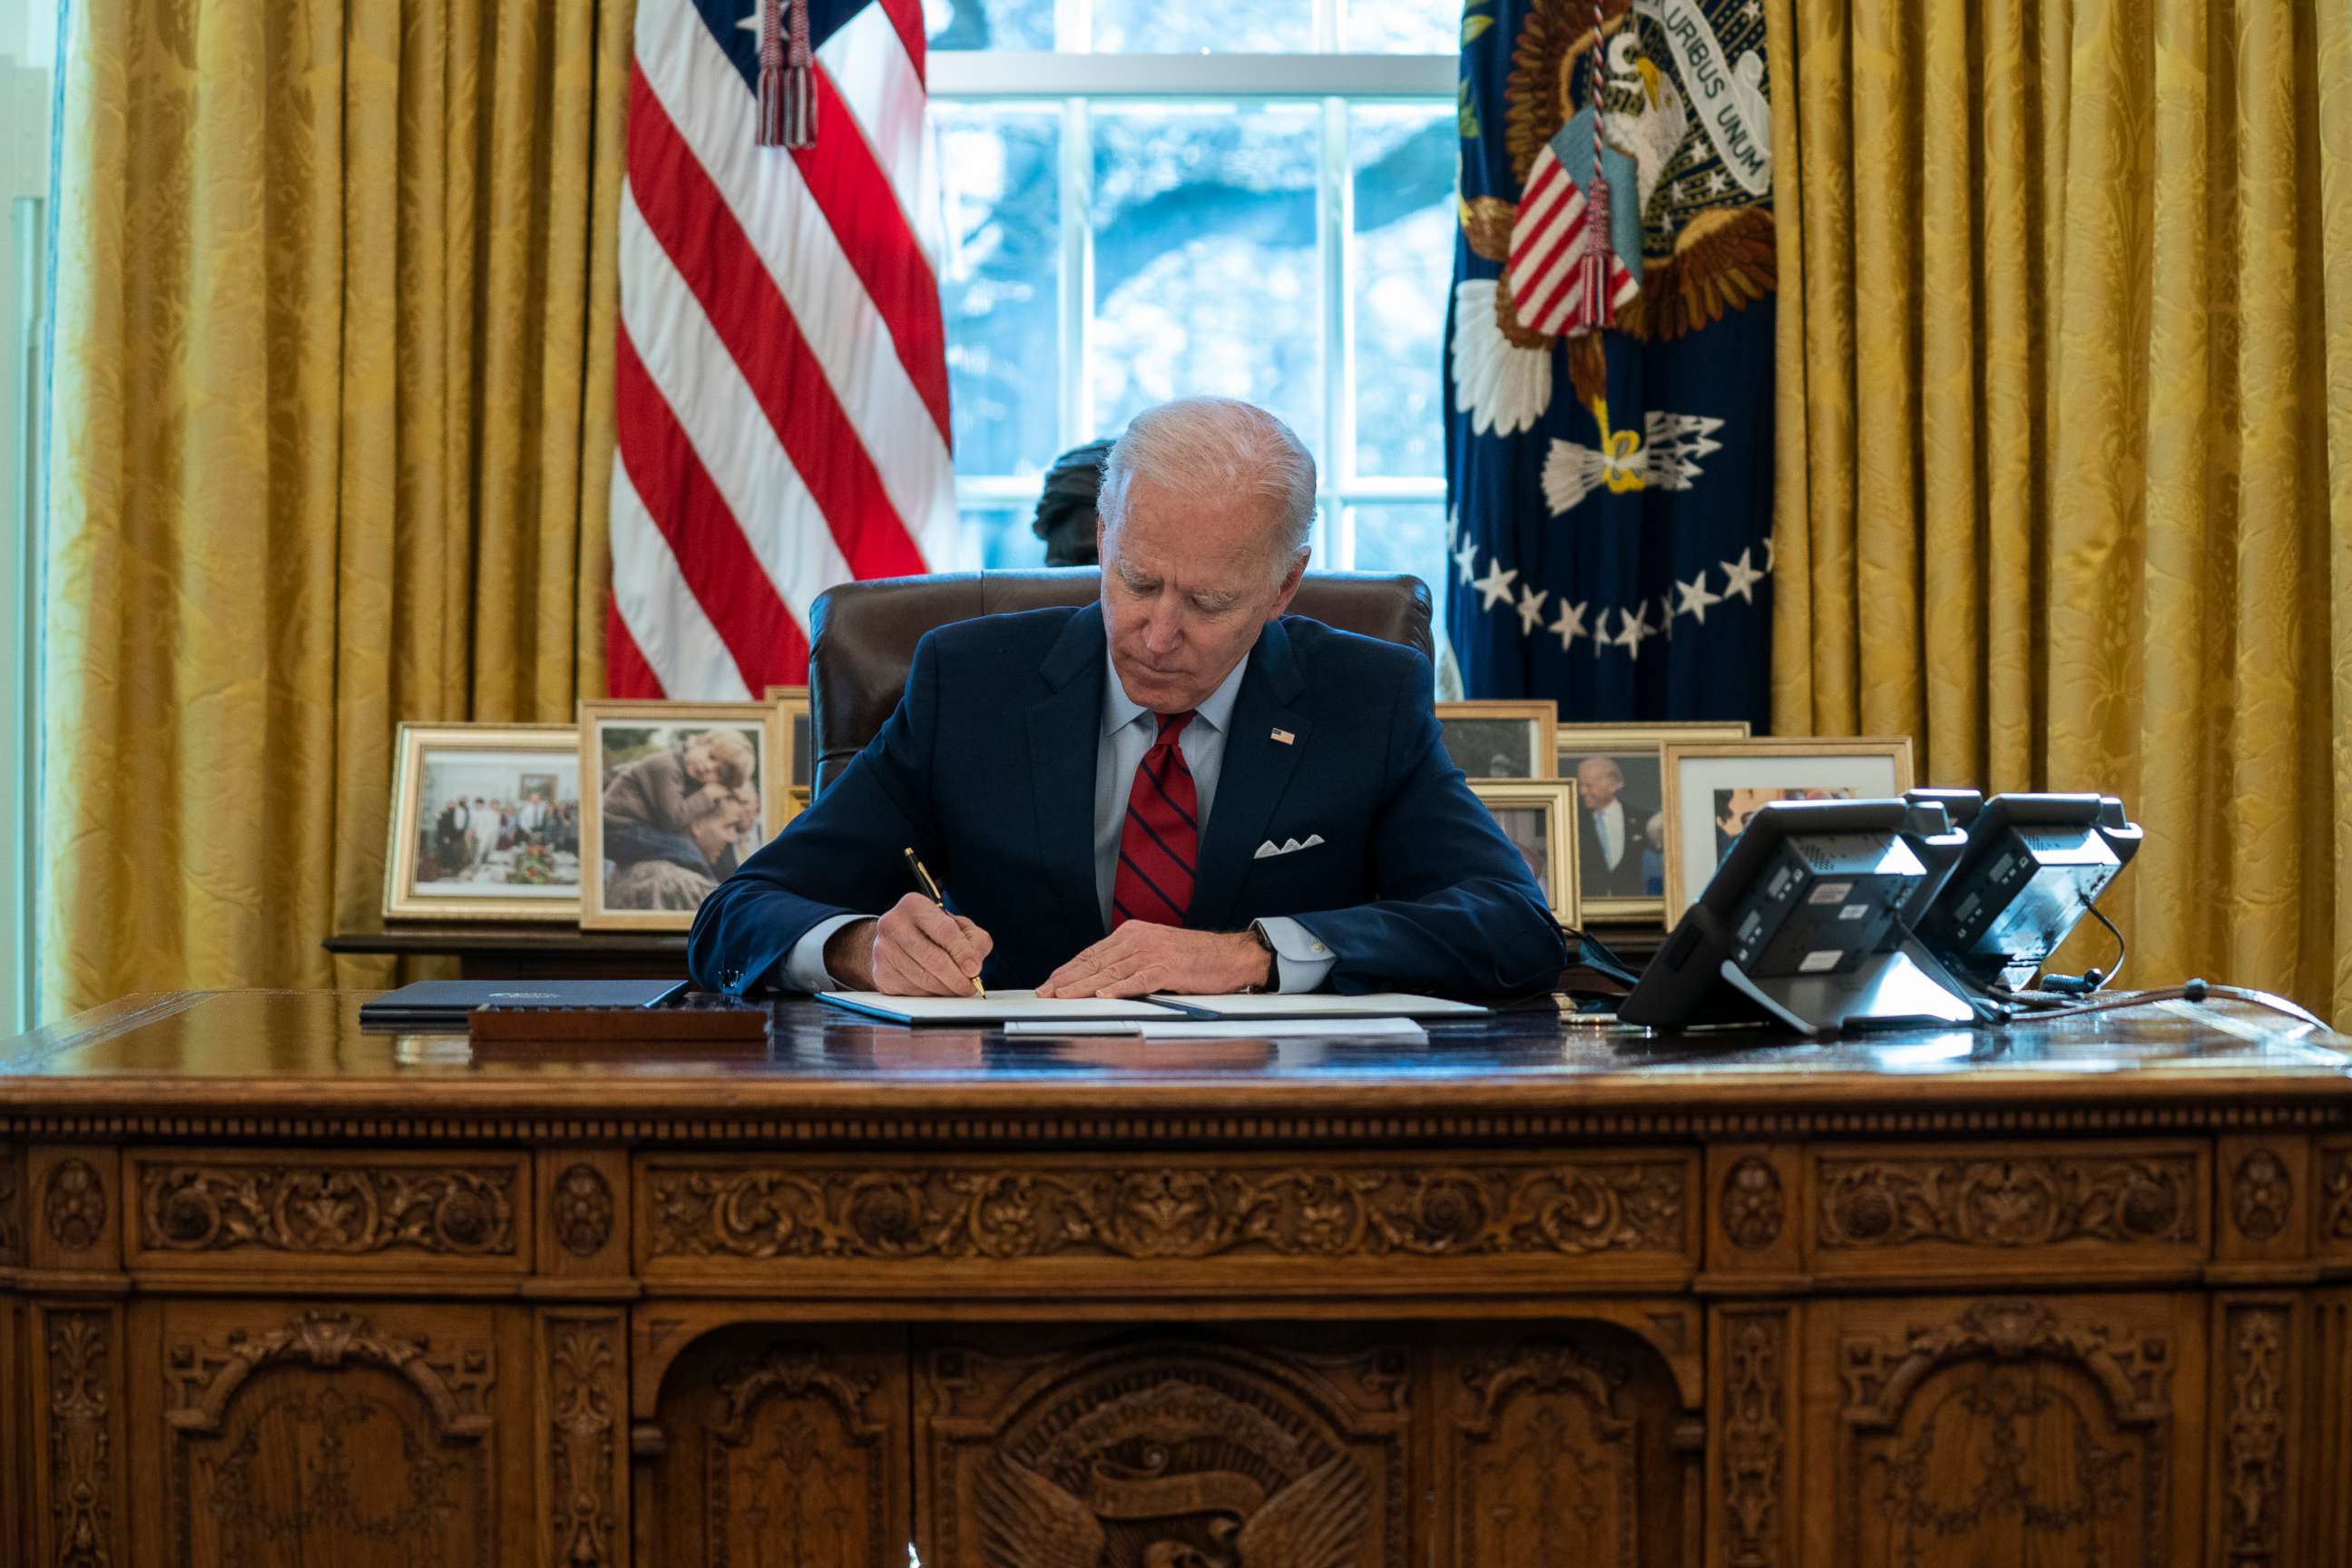 PHOTO: President Joe Biden signs a series of executive orders on health care, in the Oval Office of the White House in Washington, Jan. 28, 2021.